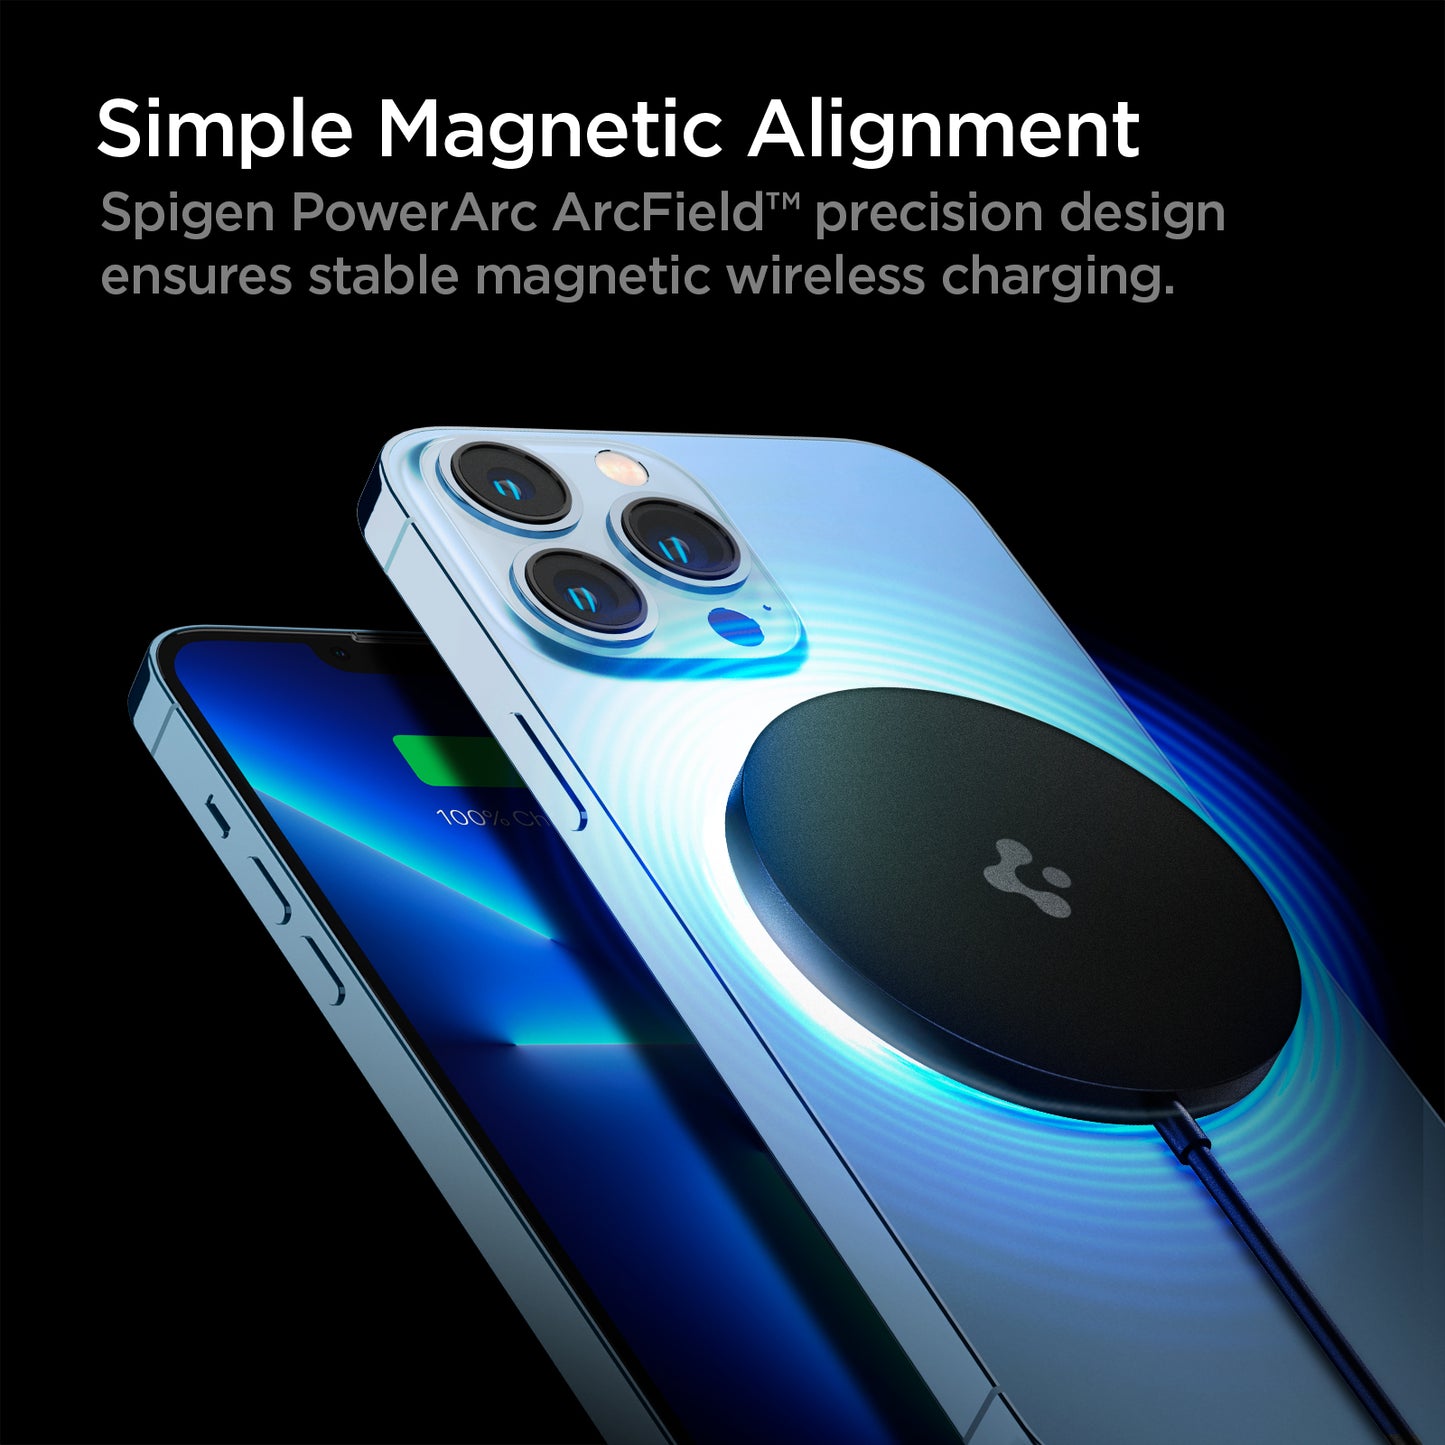 ACH02190 - ArcField™ Magnetic 7.5W Wireless Charger PF2009 (MagFit) in Black showing the Simple Magnetic Alignment, Spigen PowerArc ArcField precision design ensures stable magnetic wireless charging. Partial front and above it a device showing back attached to a wireless charger